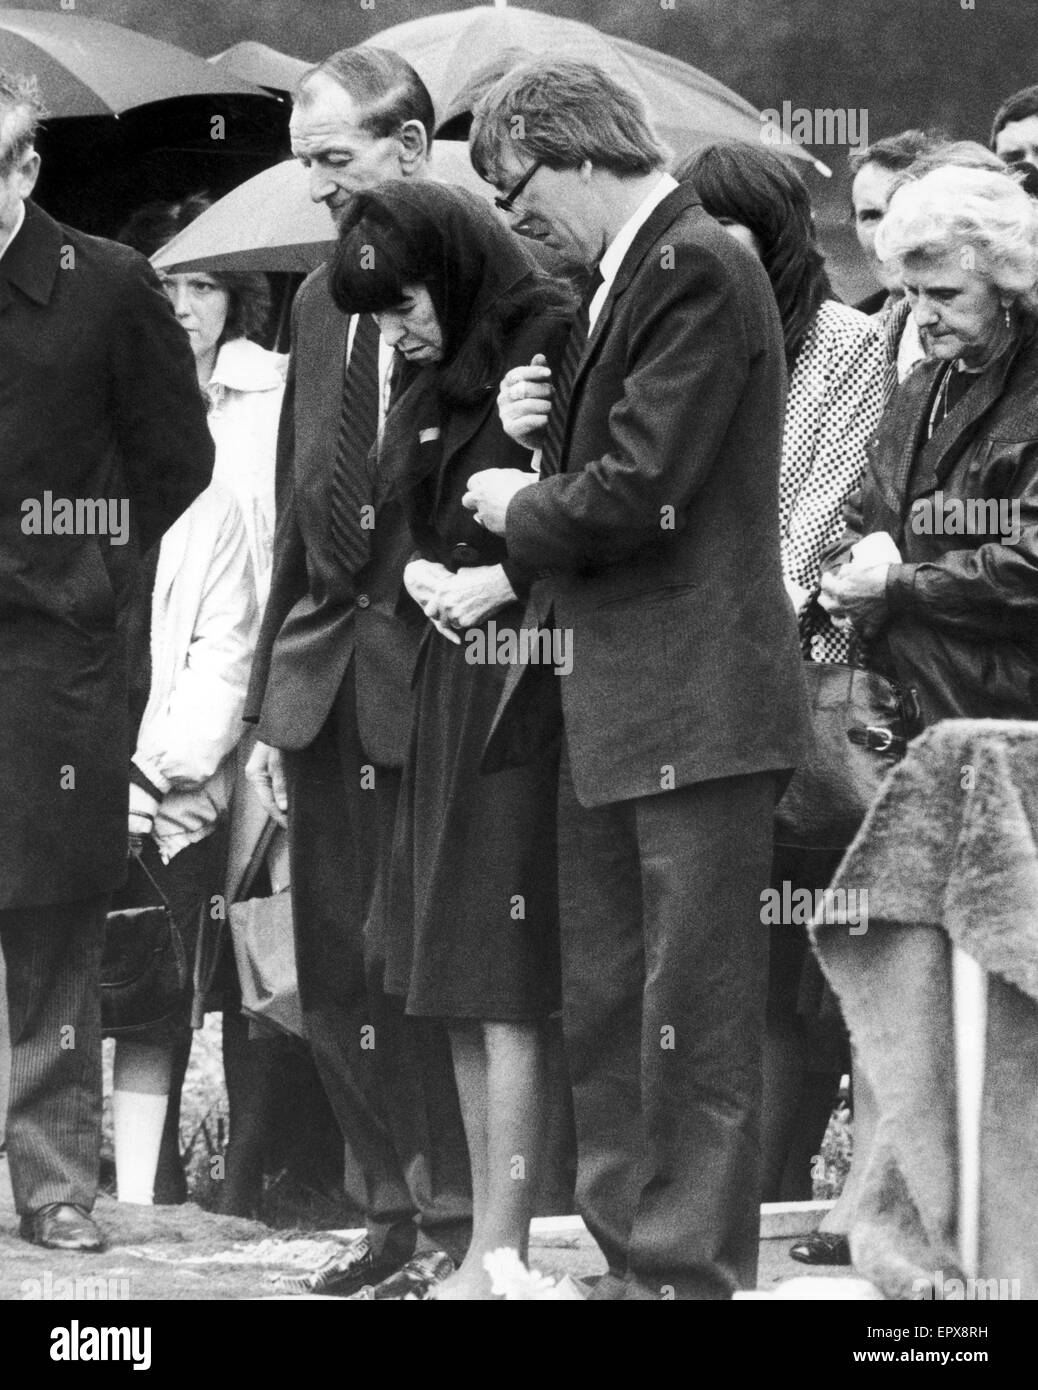 Funeral of Pauline Reade, 6th August 1987. The remains of Pauline Reade, were found on Saddleworth Moor, near Oldham, in the early hours of 1st July 1987. Pauline Reade was abducted and killed by Ian Brady and Myra Hindley on 12th July 1963. Pictured, Joa Stock Photo